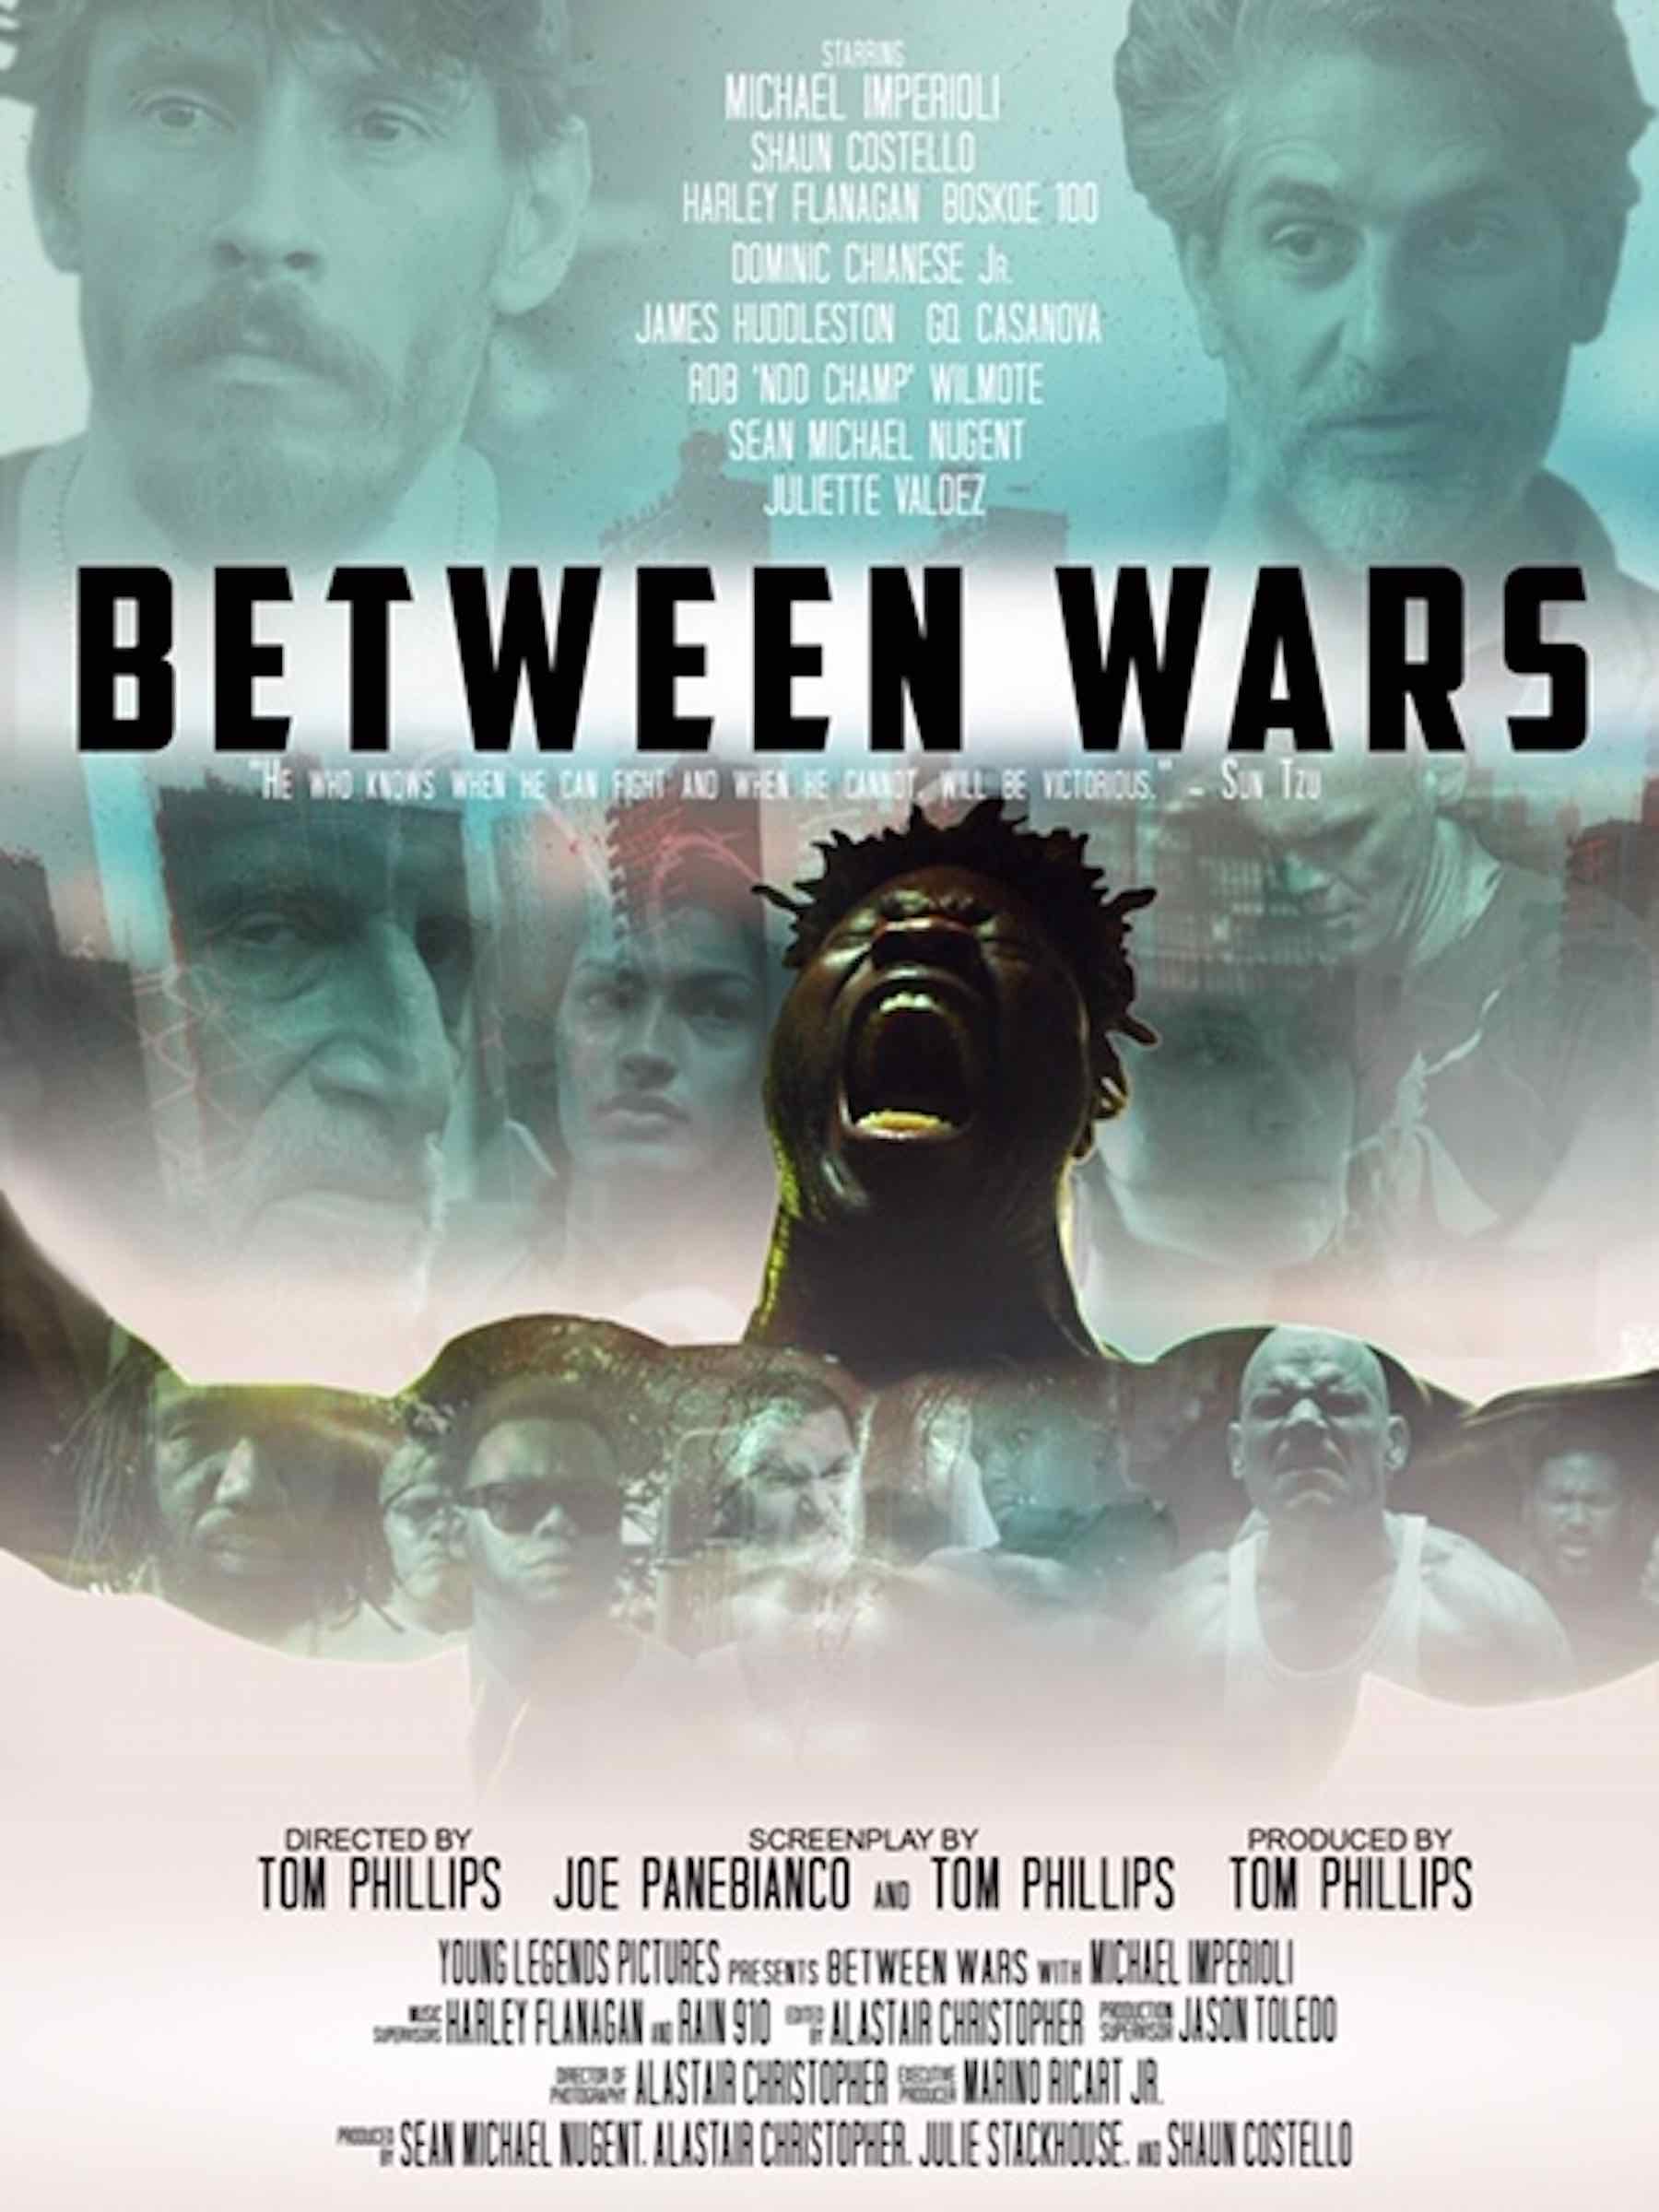 Harley Flanagan’s star continues to rise with his role in 'Between Wars'. Here's our interview with punker Harley Flanagan.